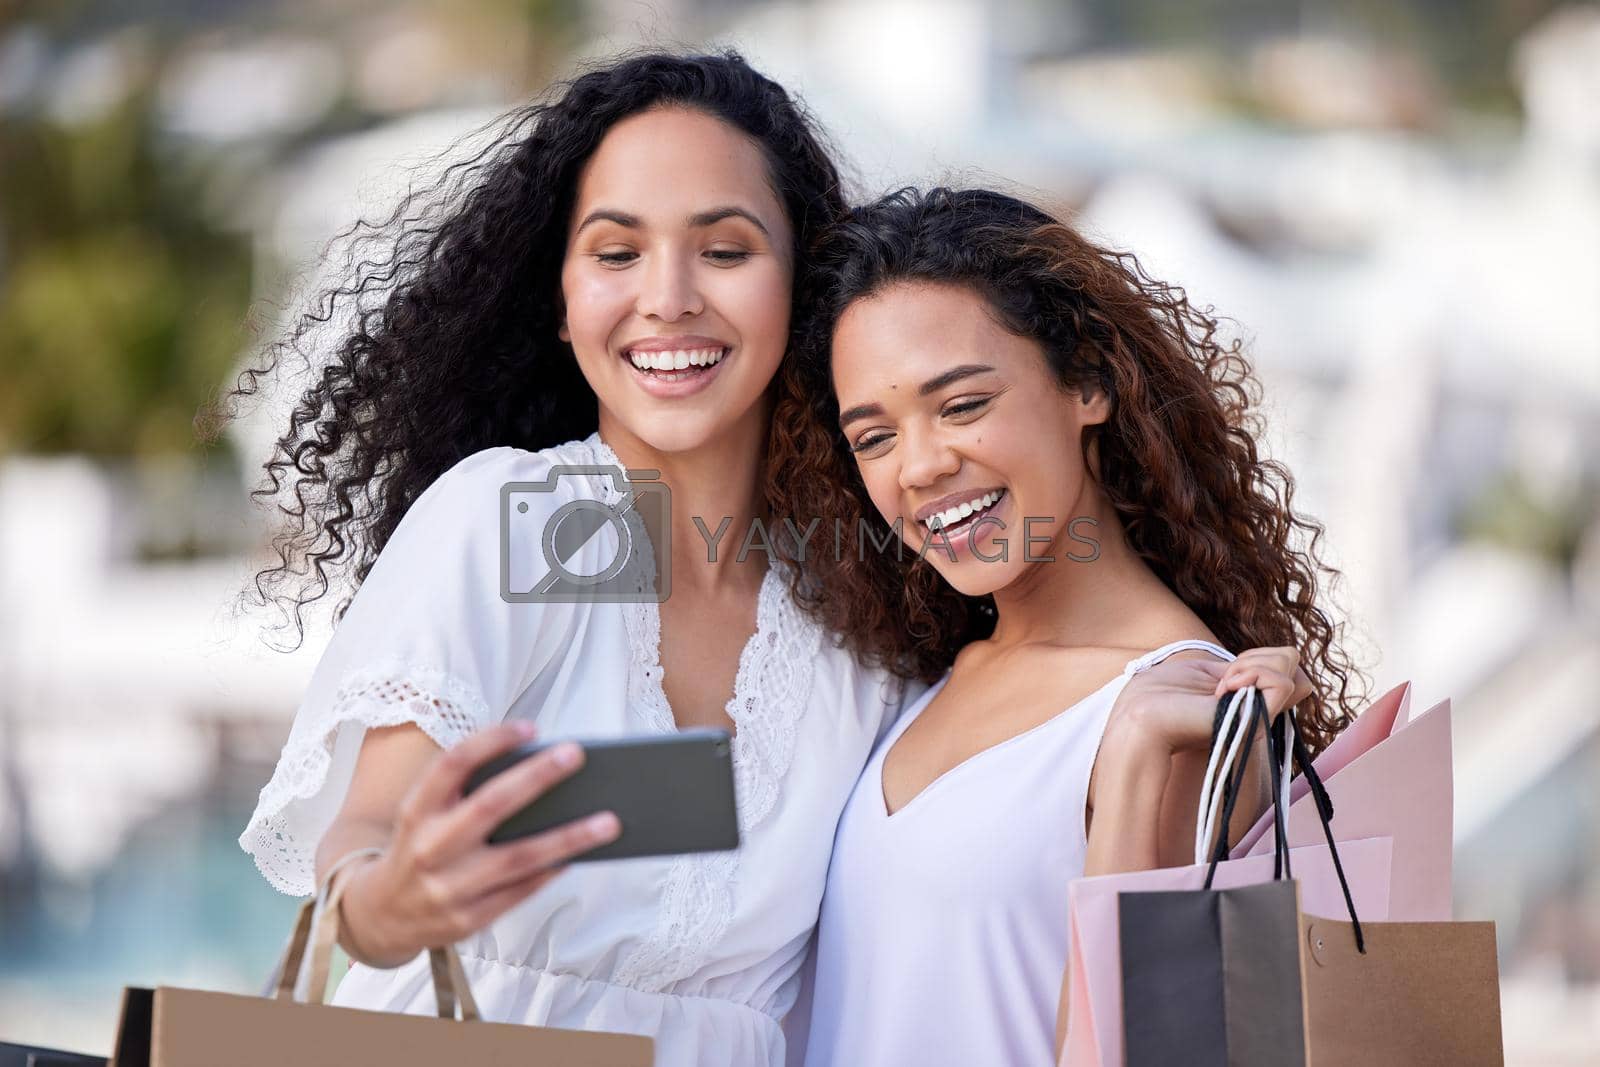 Shot of two young women taking selfies while shopping against an urban background.